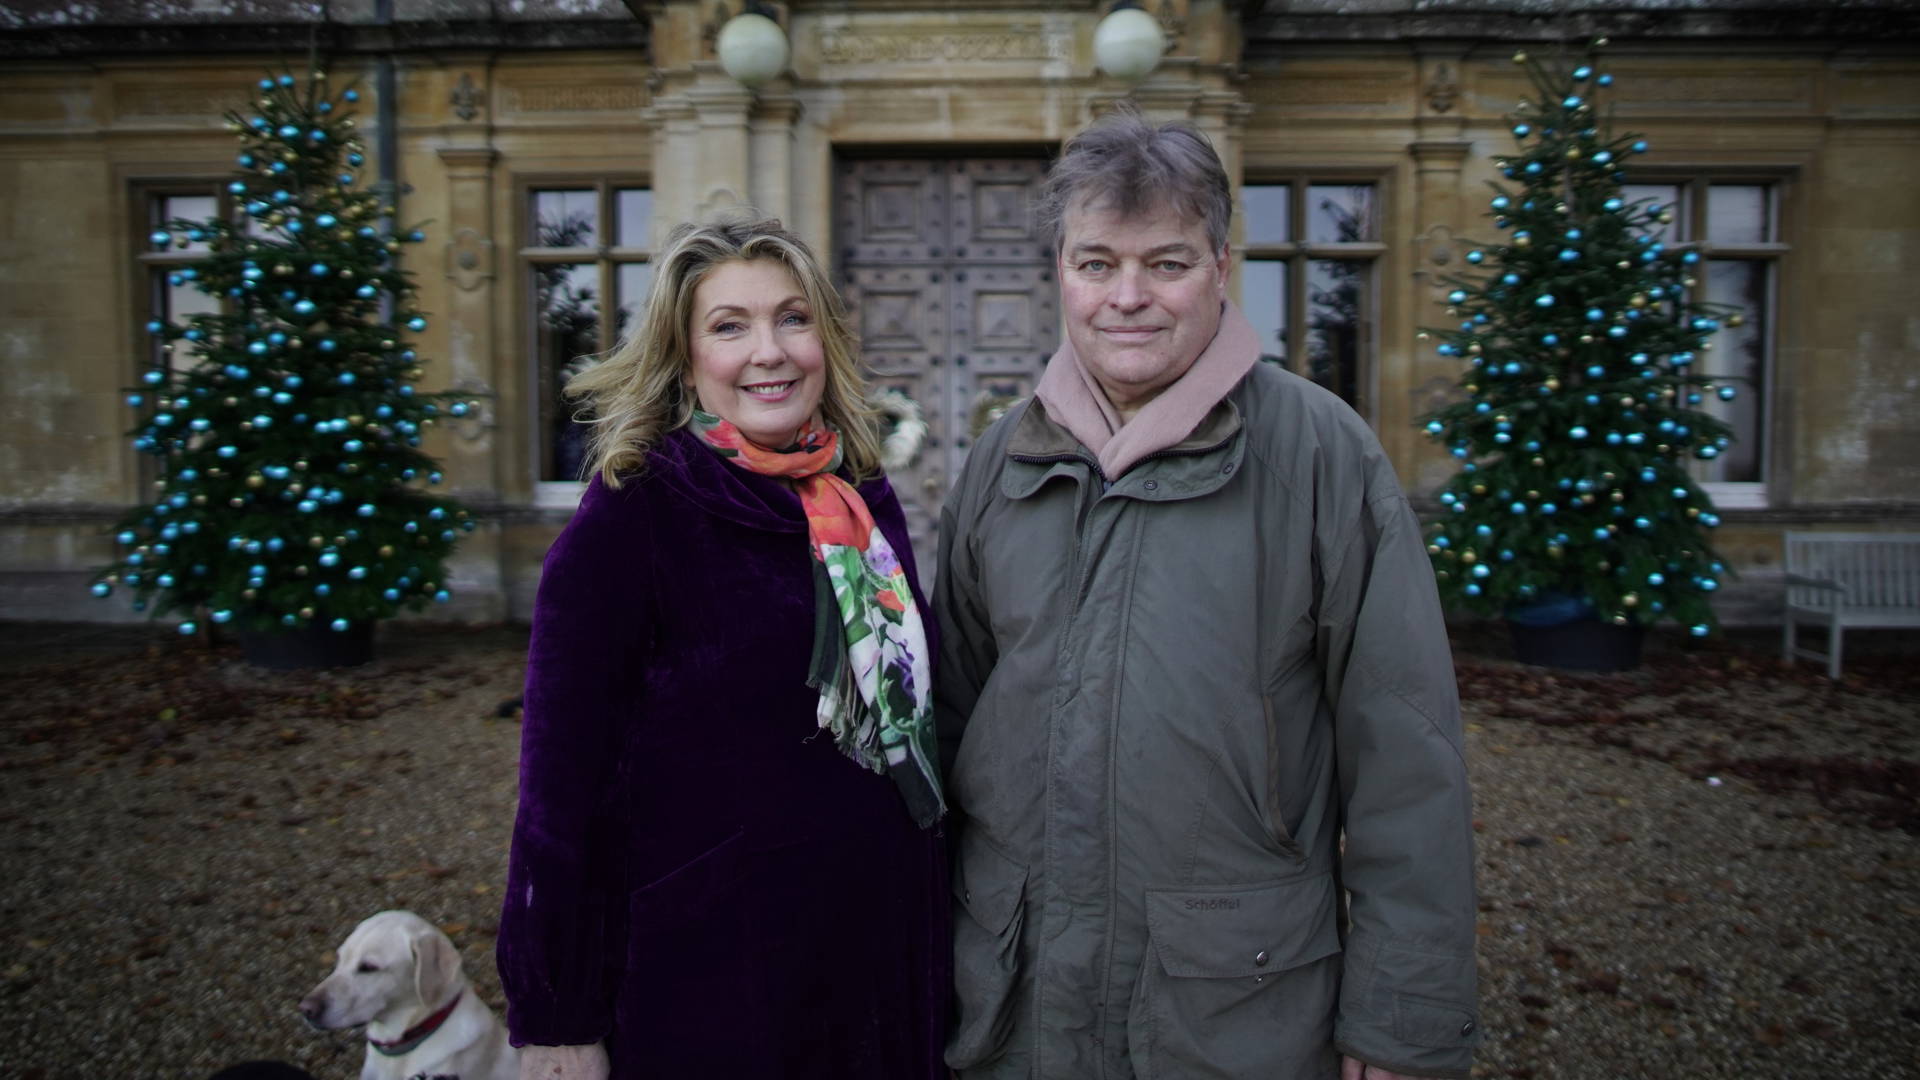 Highclere: Behind the Scenes including Christmas Special